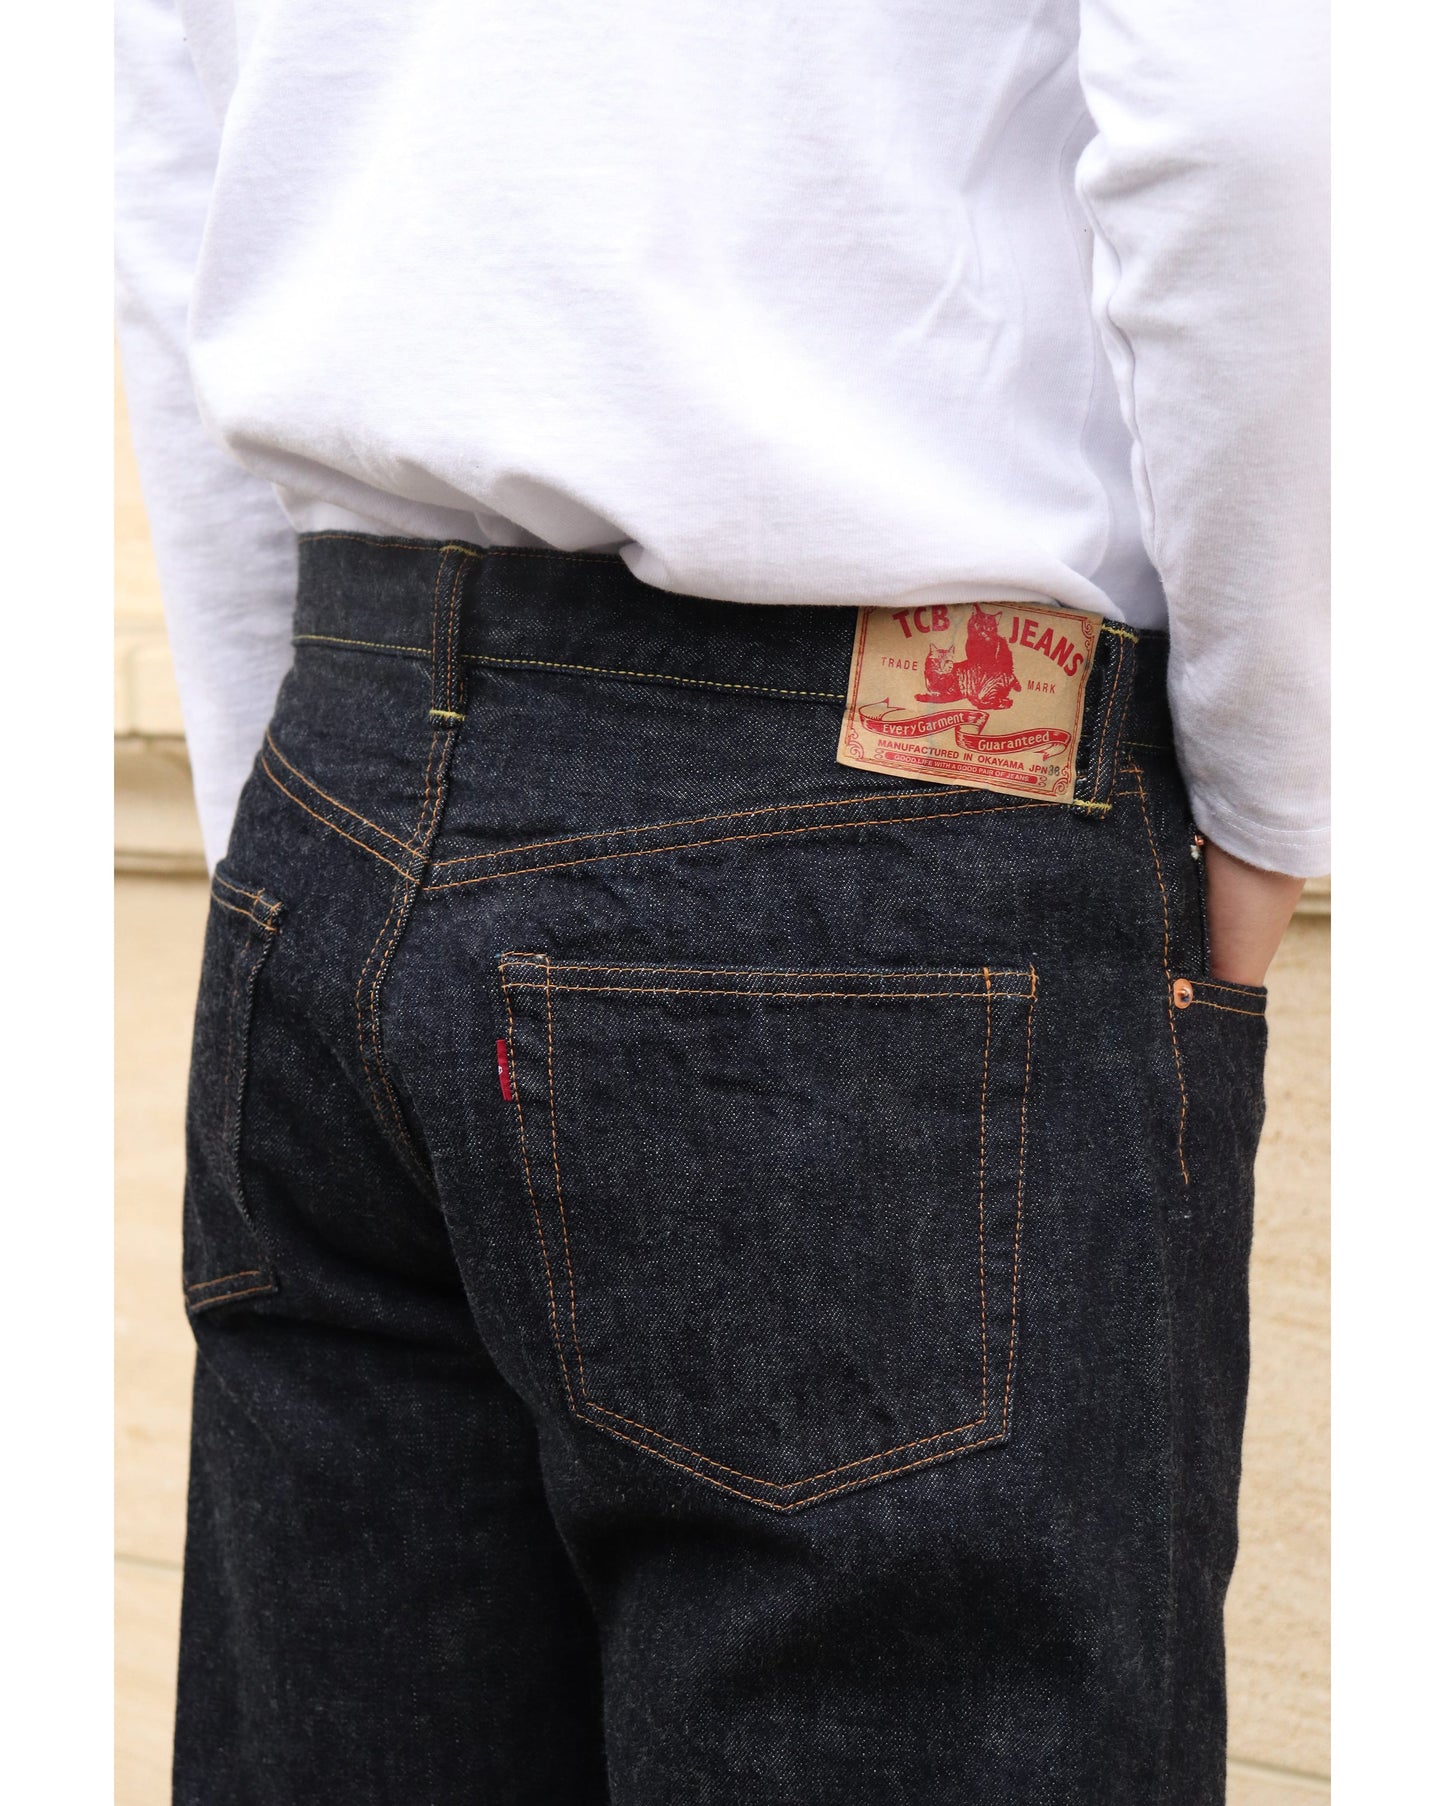 TCB jeans 50's OW